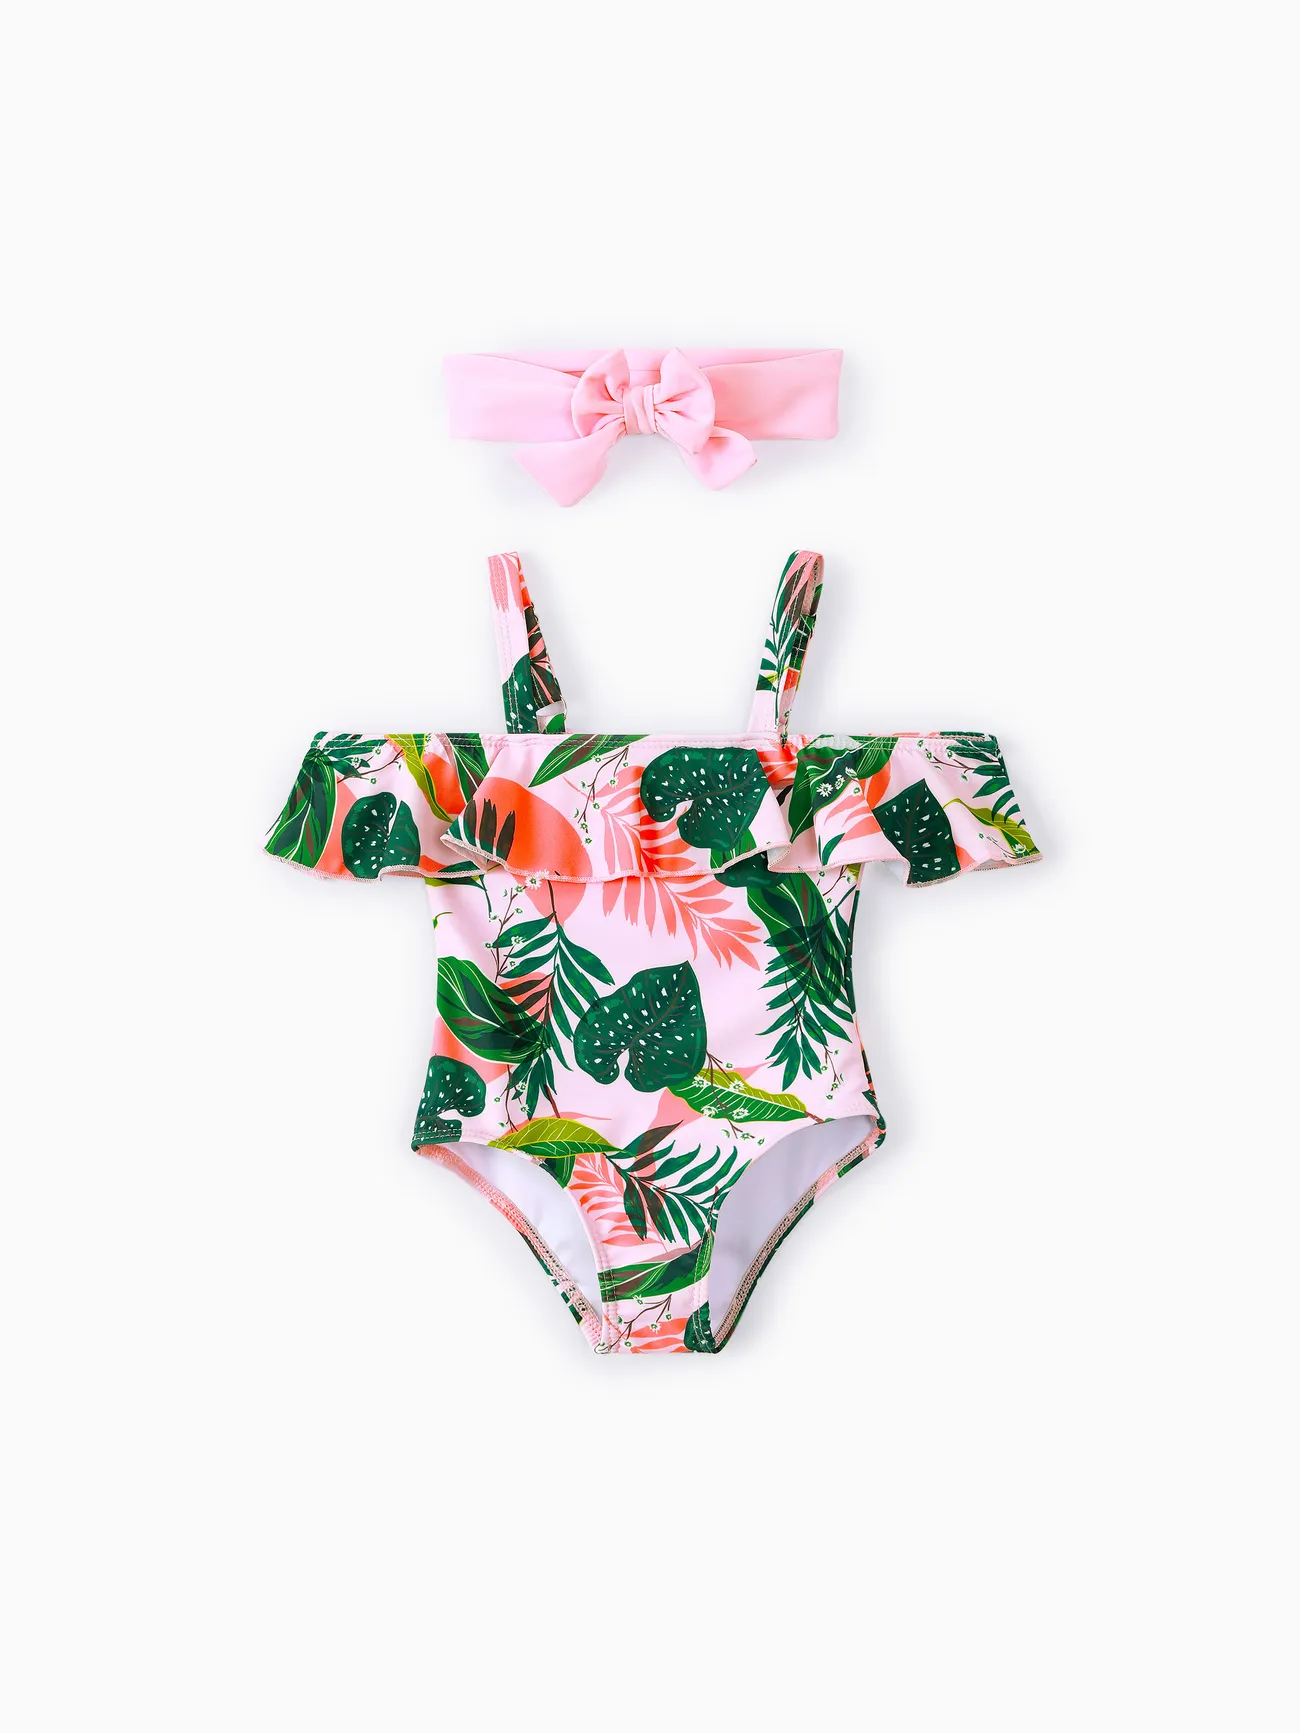 Toddler Girl 2pcs Floral Print Ruffled Swimsuit with Headband Green big image 1